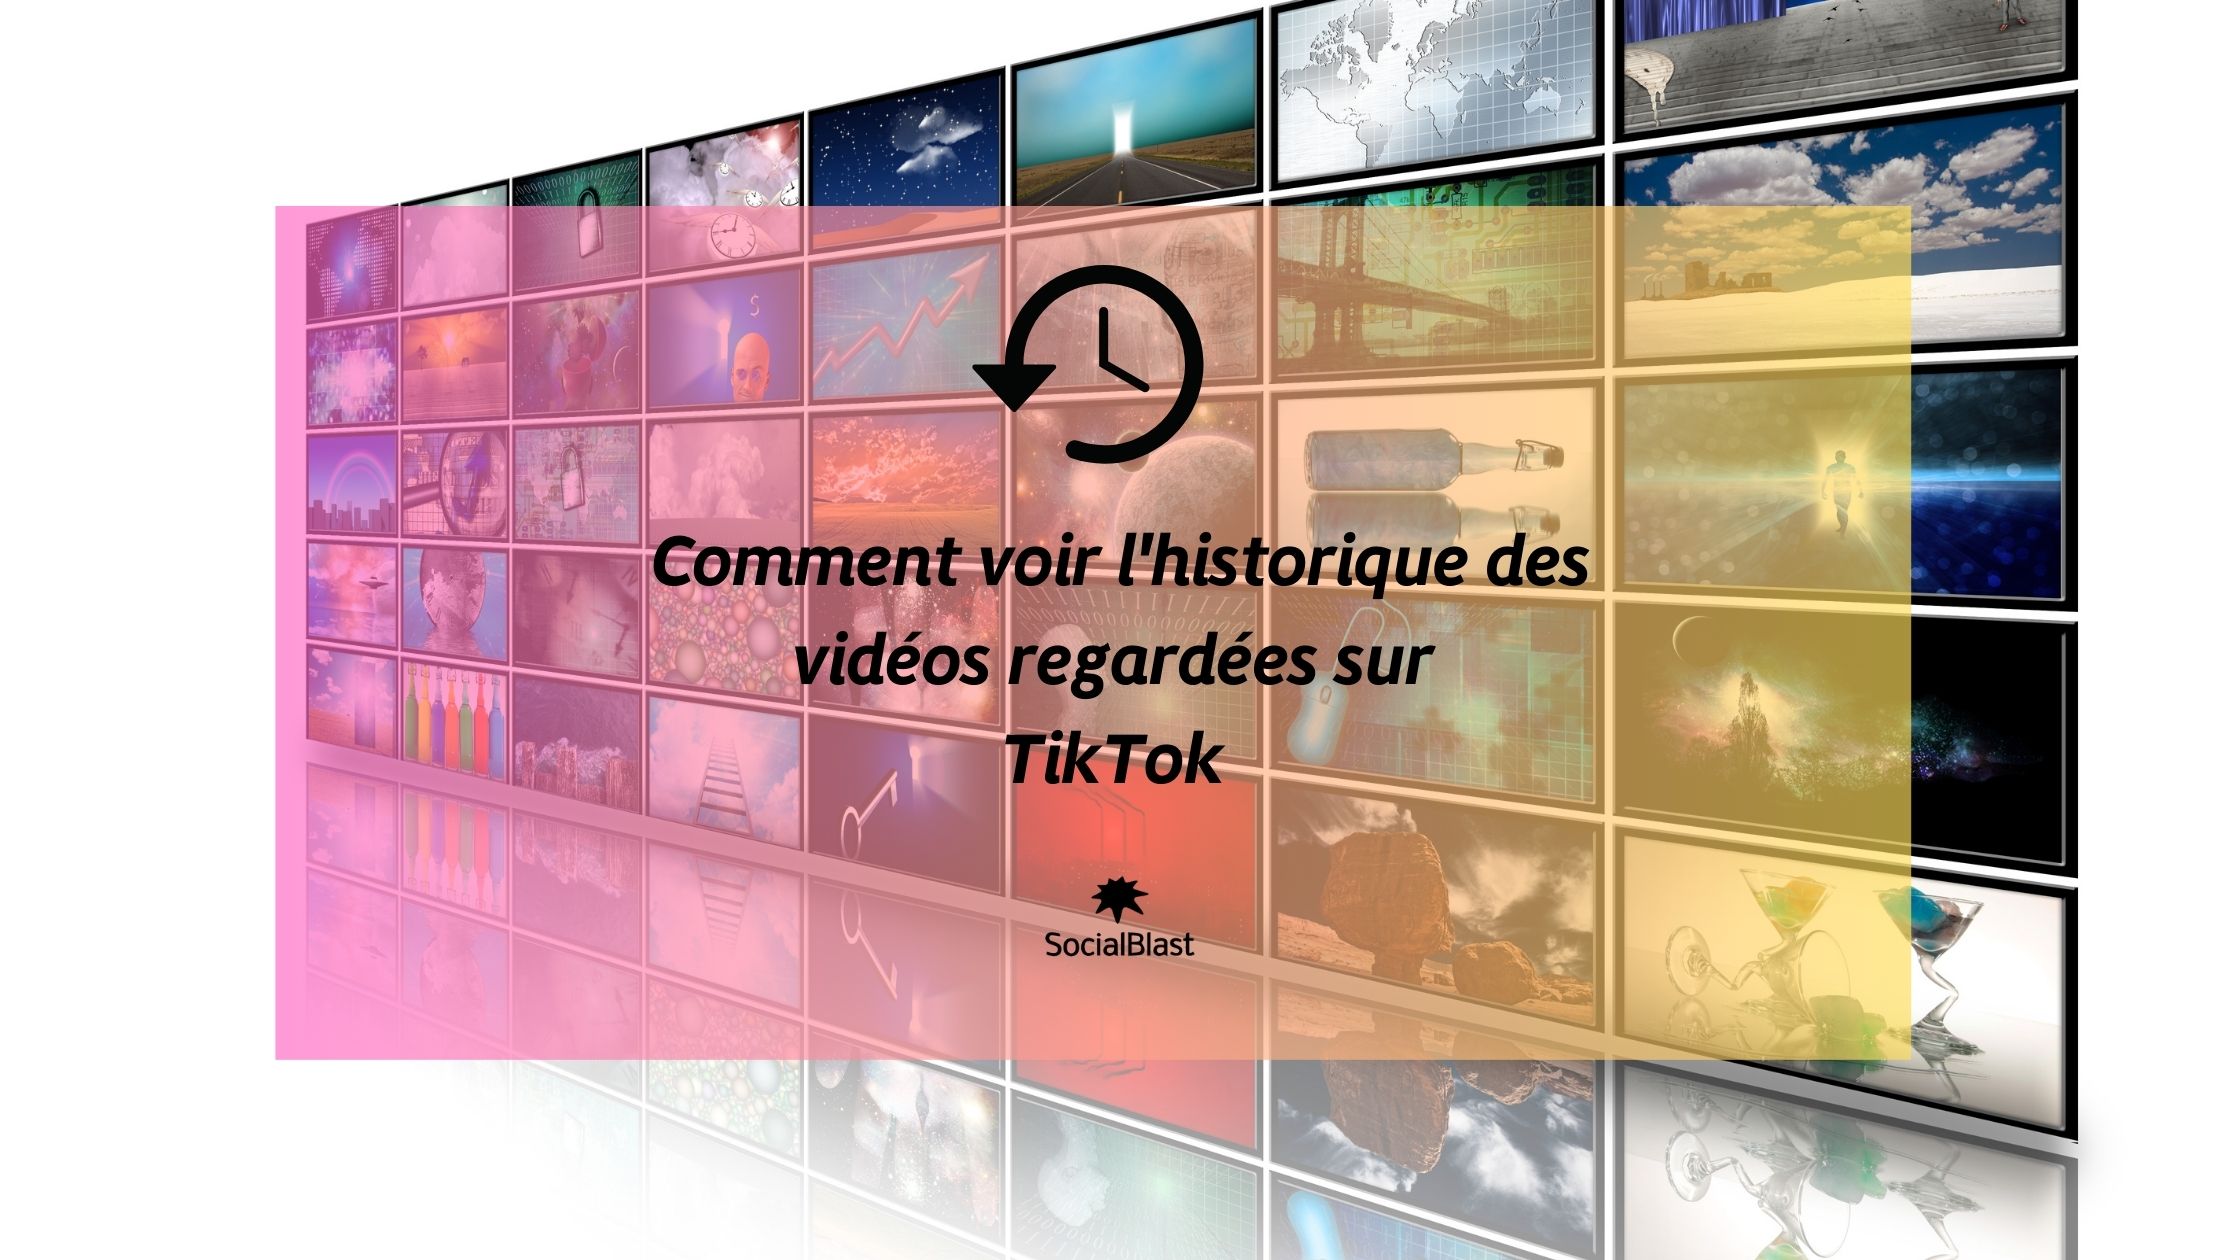 see the history of videos watched on TikTok